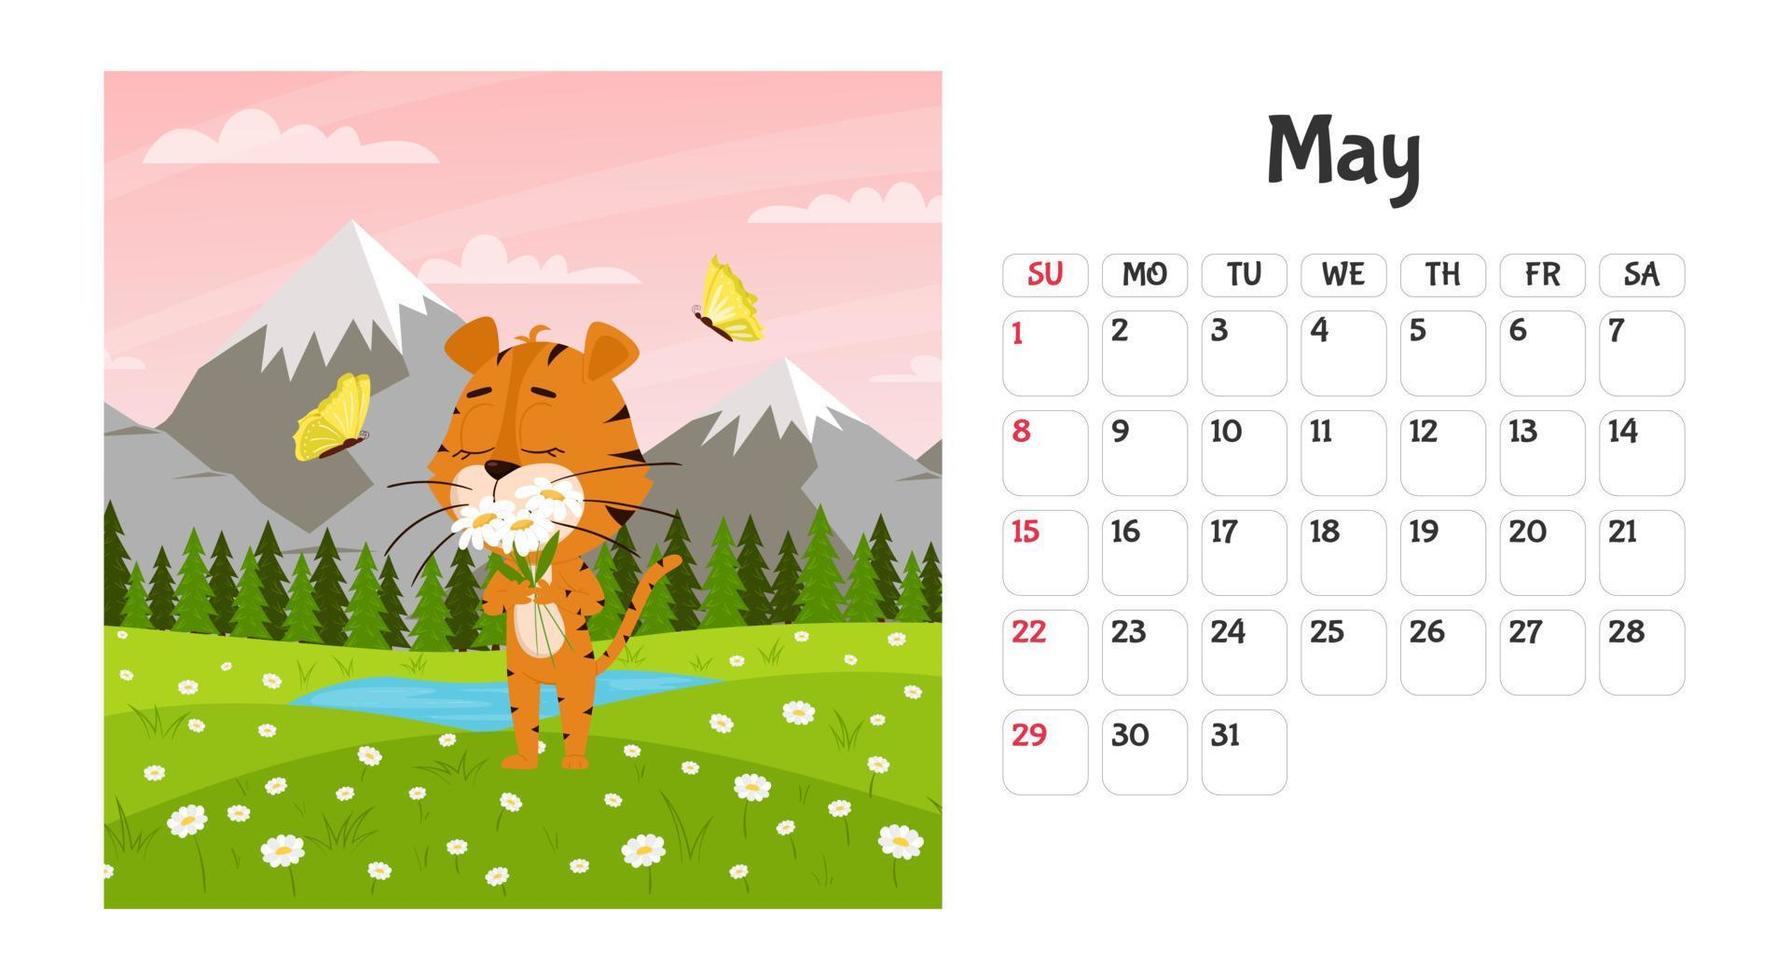 Horizontal desktop calendar page template for May 2022 with a cartoon tiger symbol of the Chinese year. The week starts on Sunday. Tiger sniffs daisies in the field vector